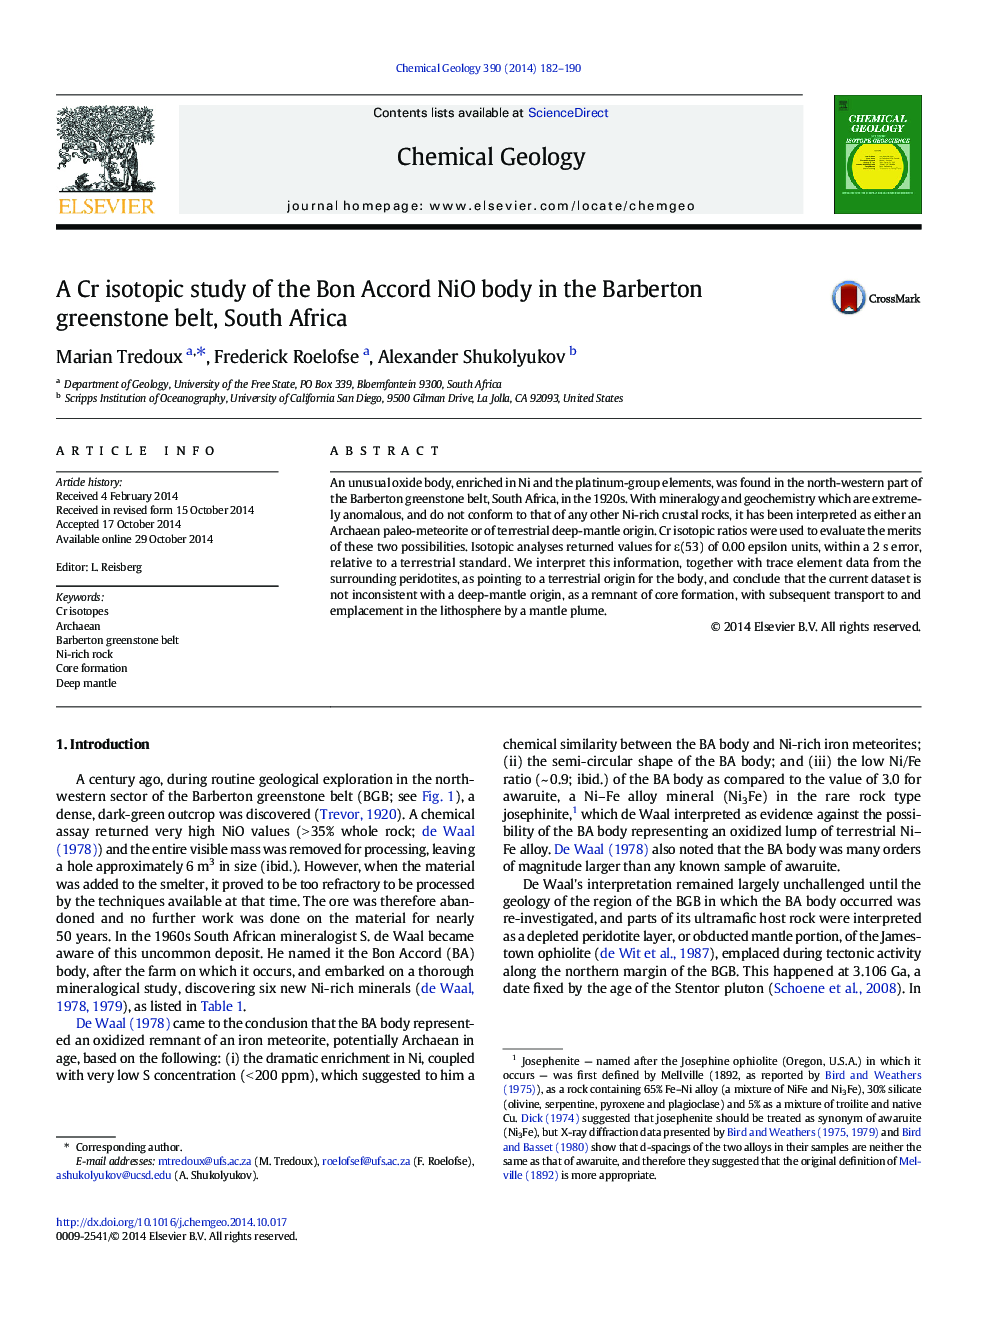 A Cr isotopic study of the Bon Accord NiO body in the Barberton greenstone belt, South Africa